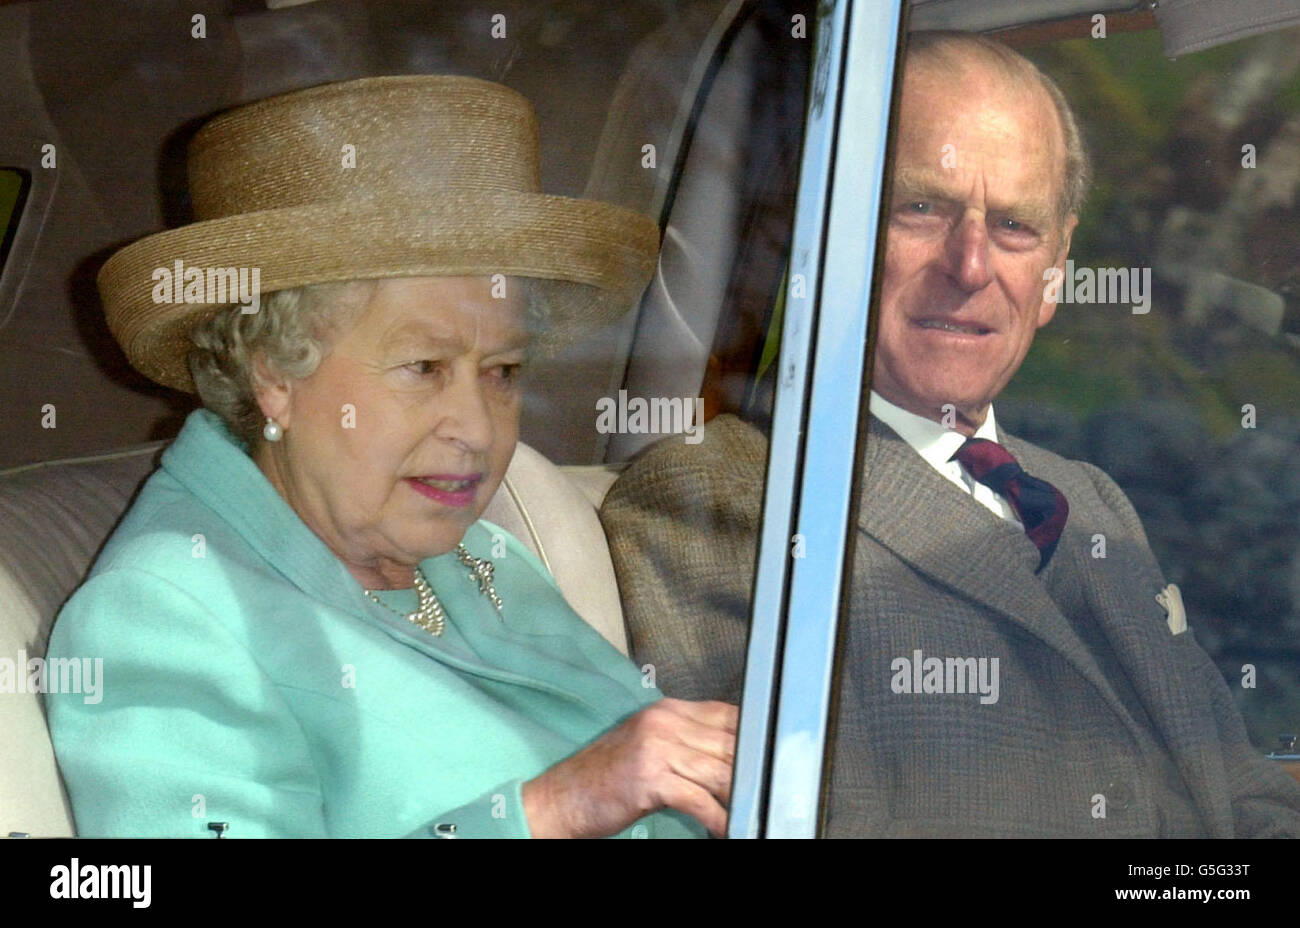 Queen Elizabeth II and the Duke of Edinburgh arrive at Crathie near the Balmoral Estate in Scotland for the morning service. Stock Photo